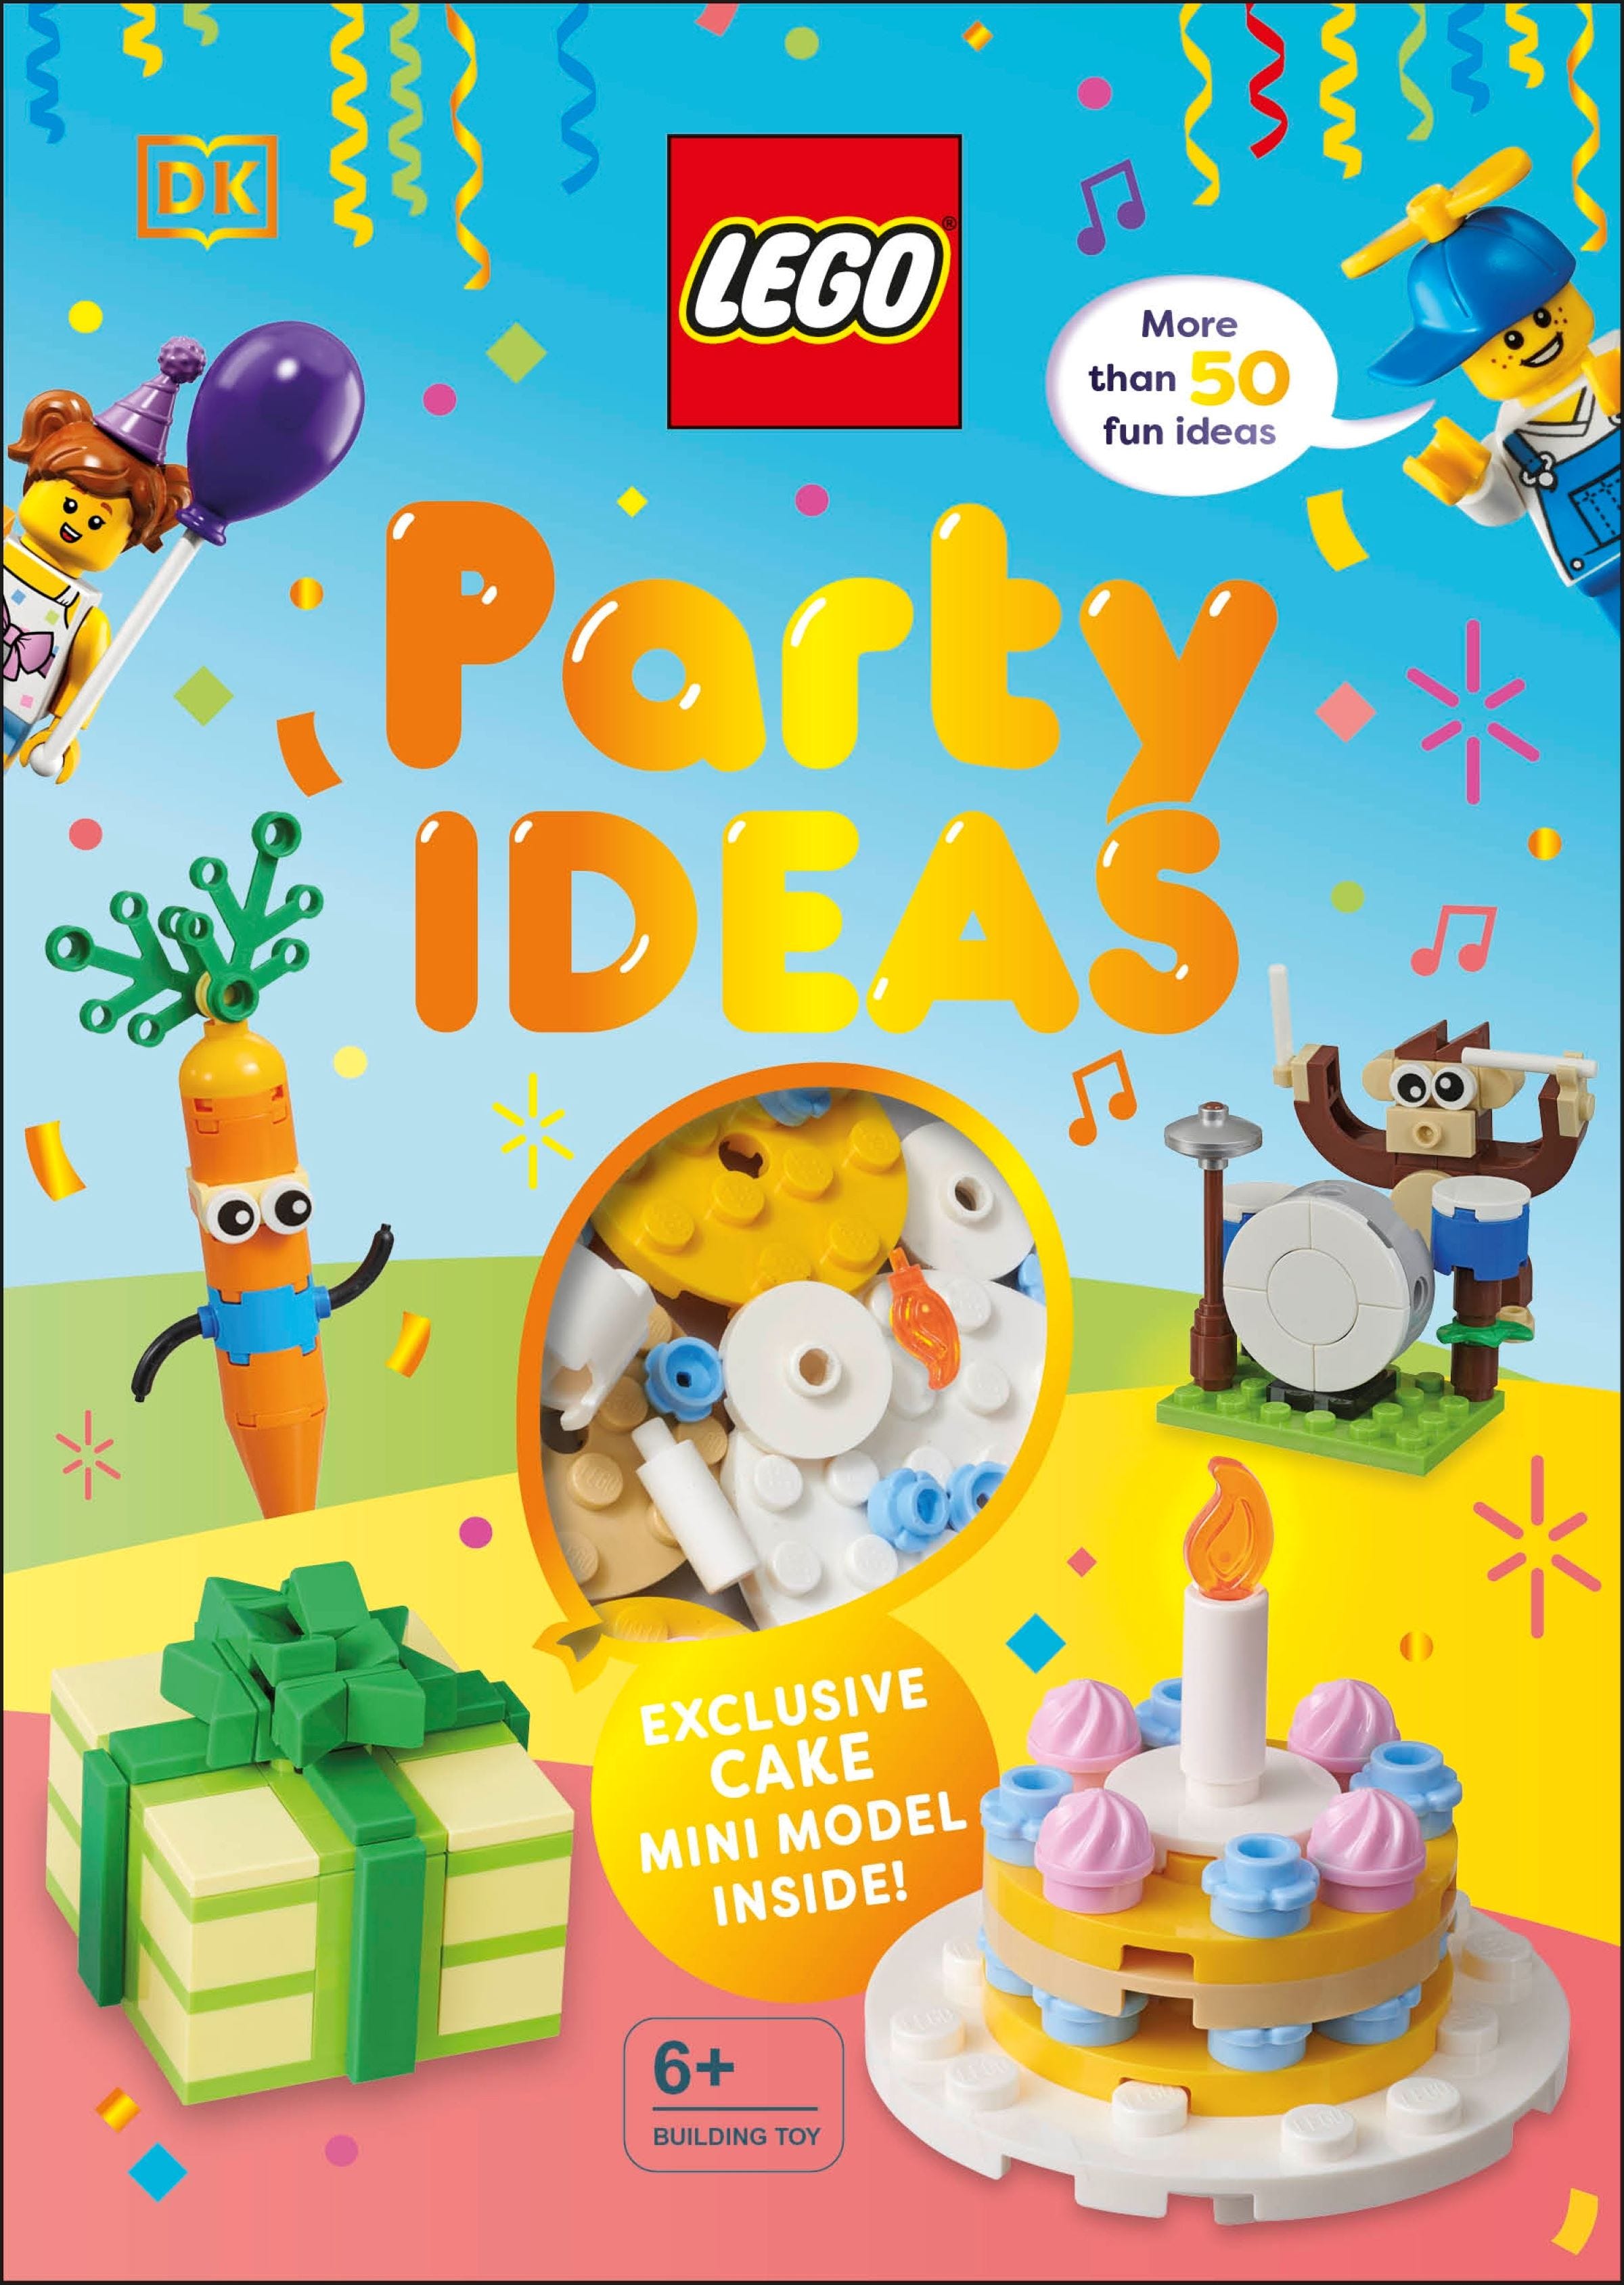 OfferteWeb.click 80-party-ideas-with-exclusive-lego-cake-mini-model